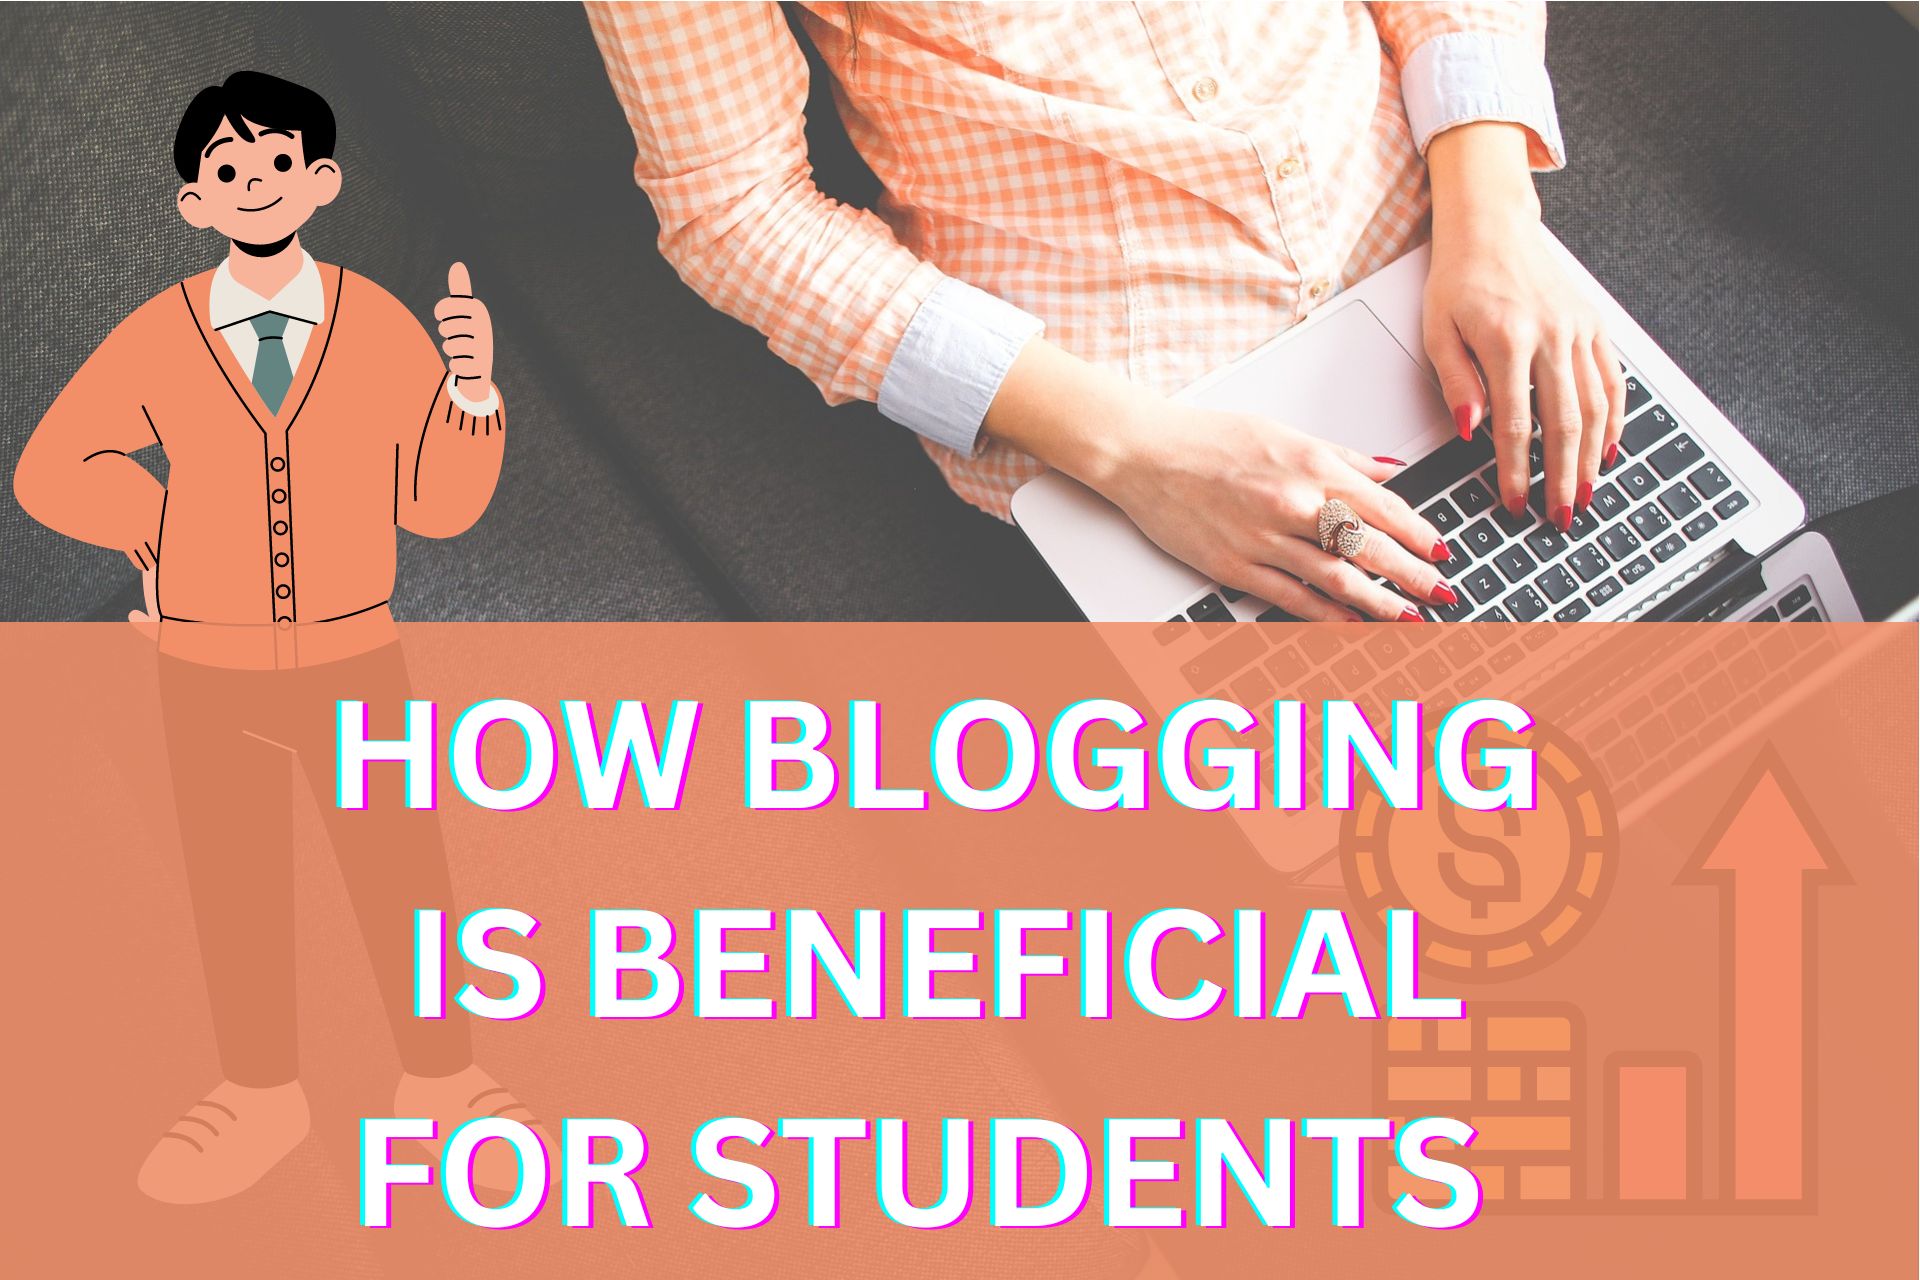 How blogging is beneficial for students?